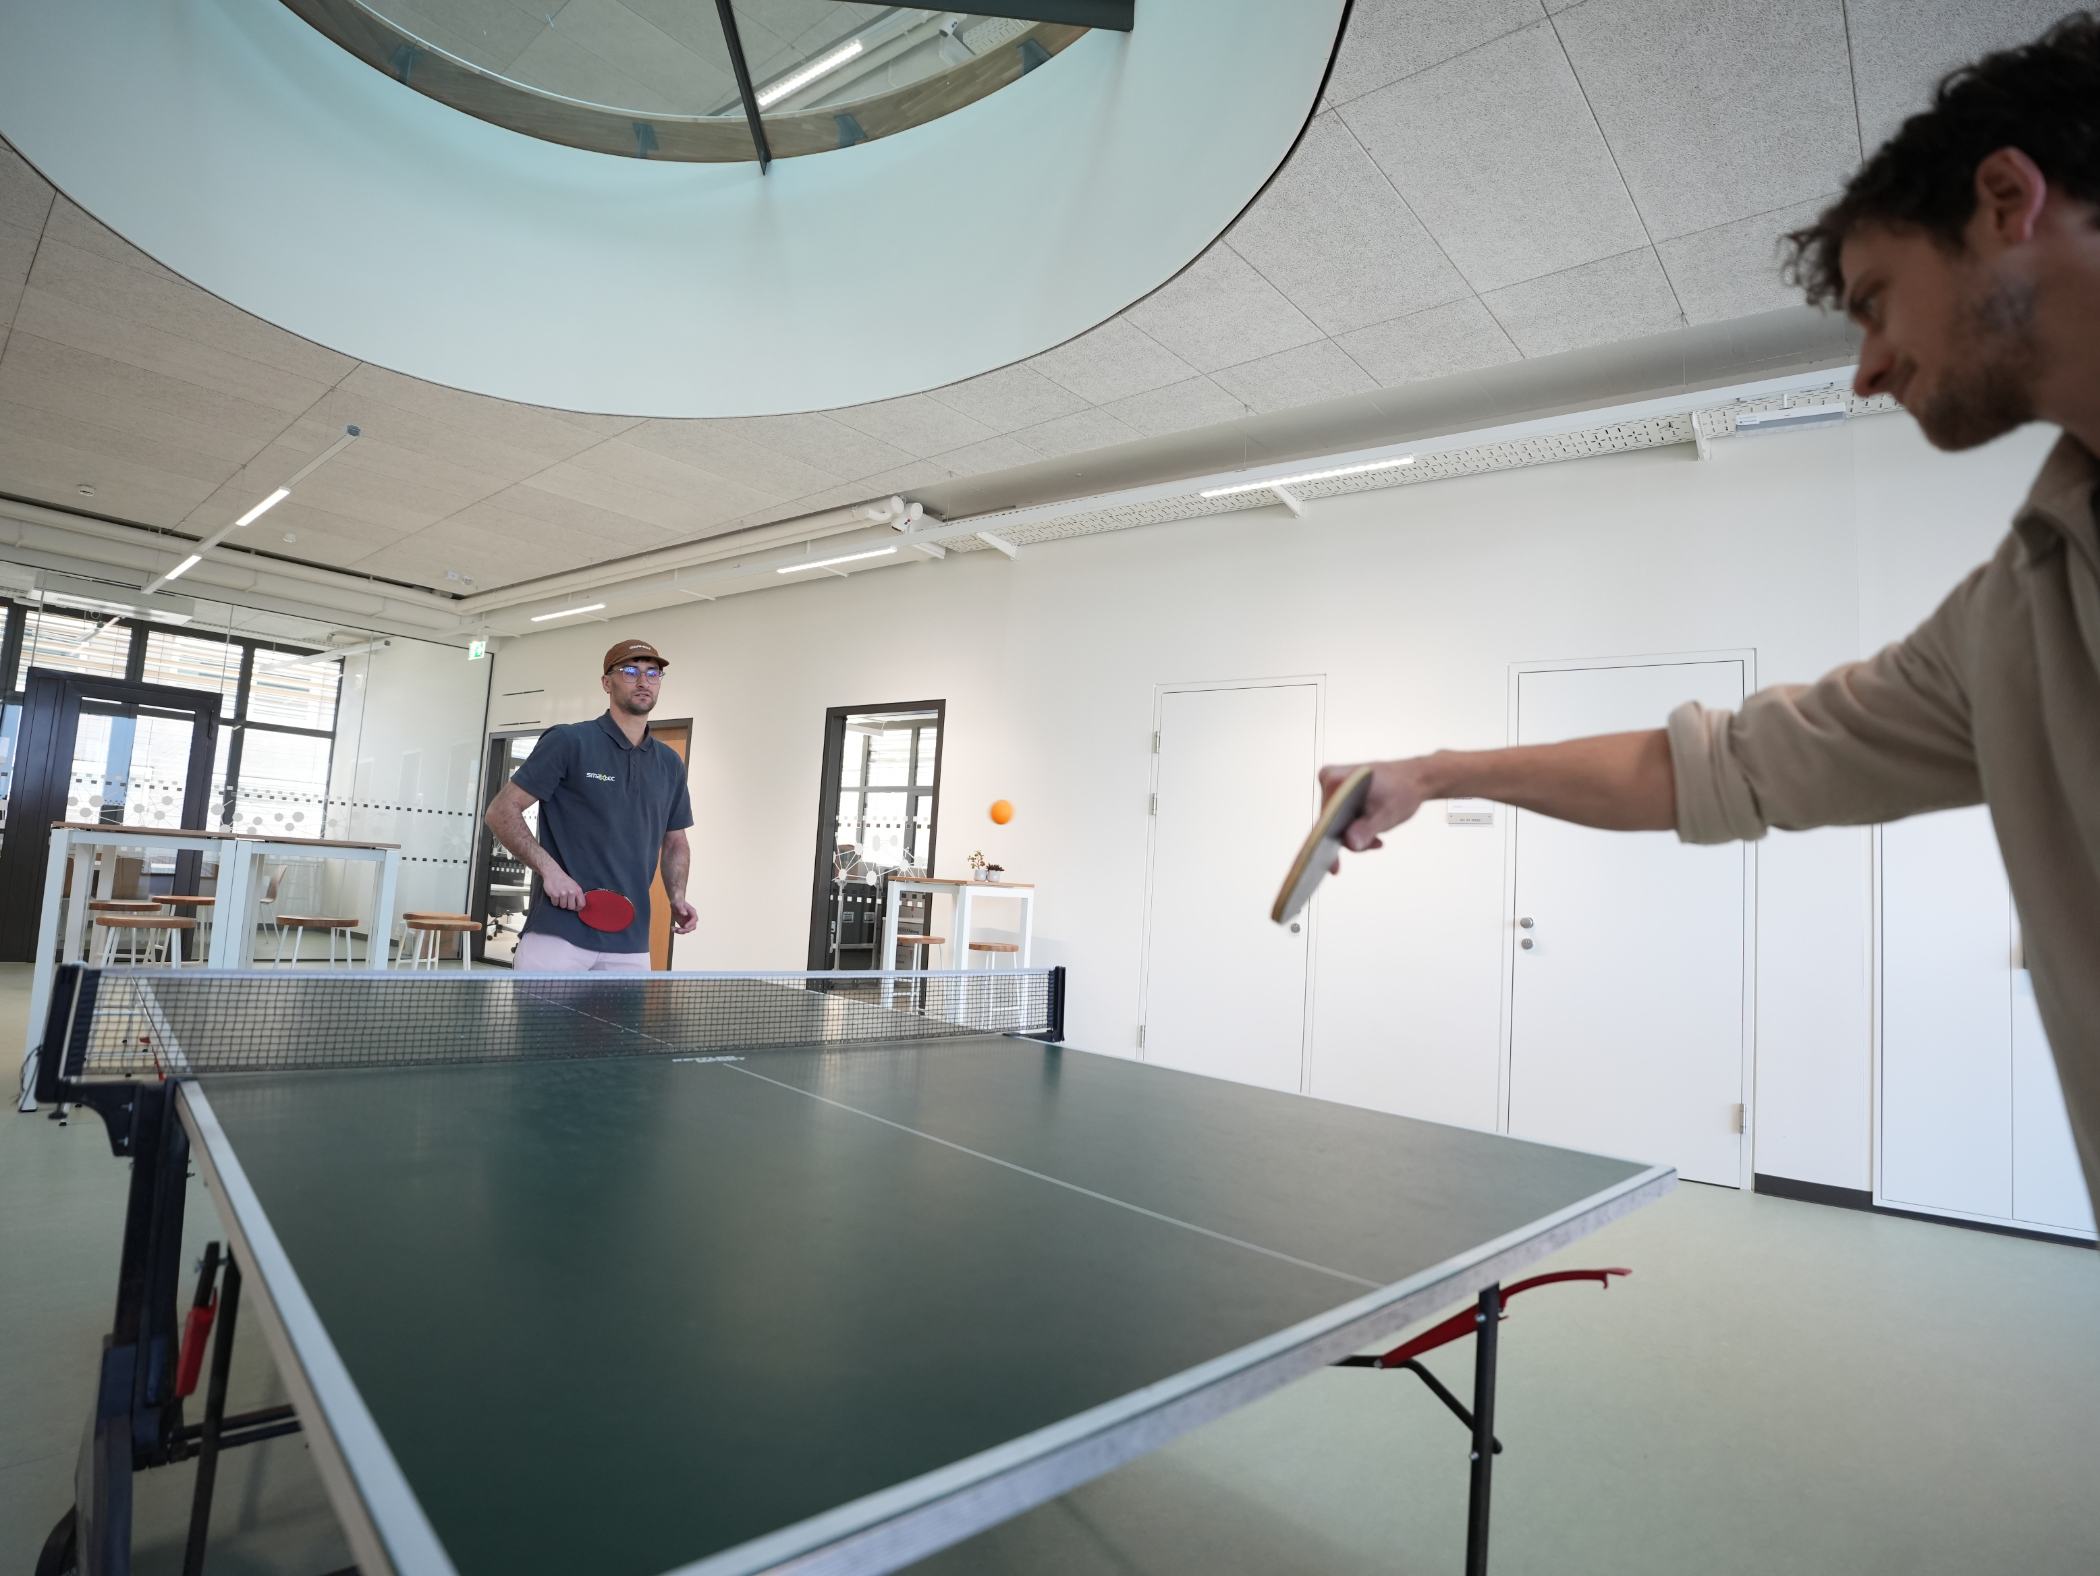 smaXtec employees play table tennis during the break